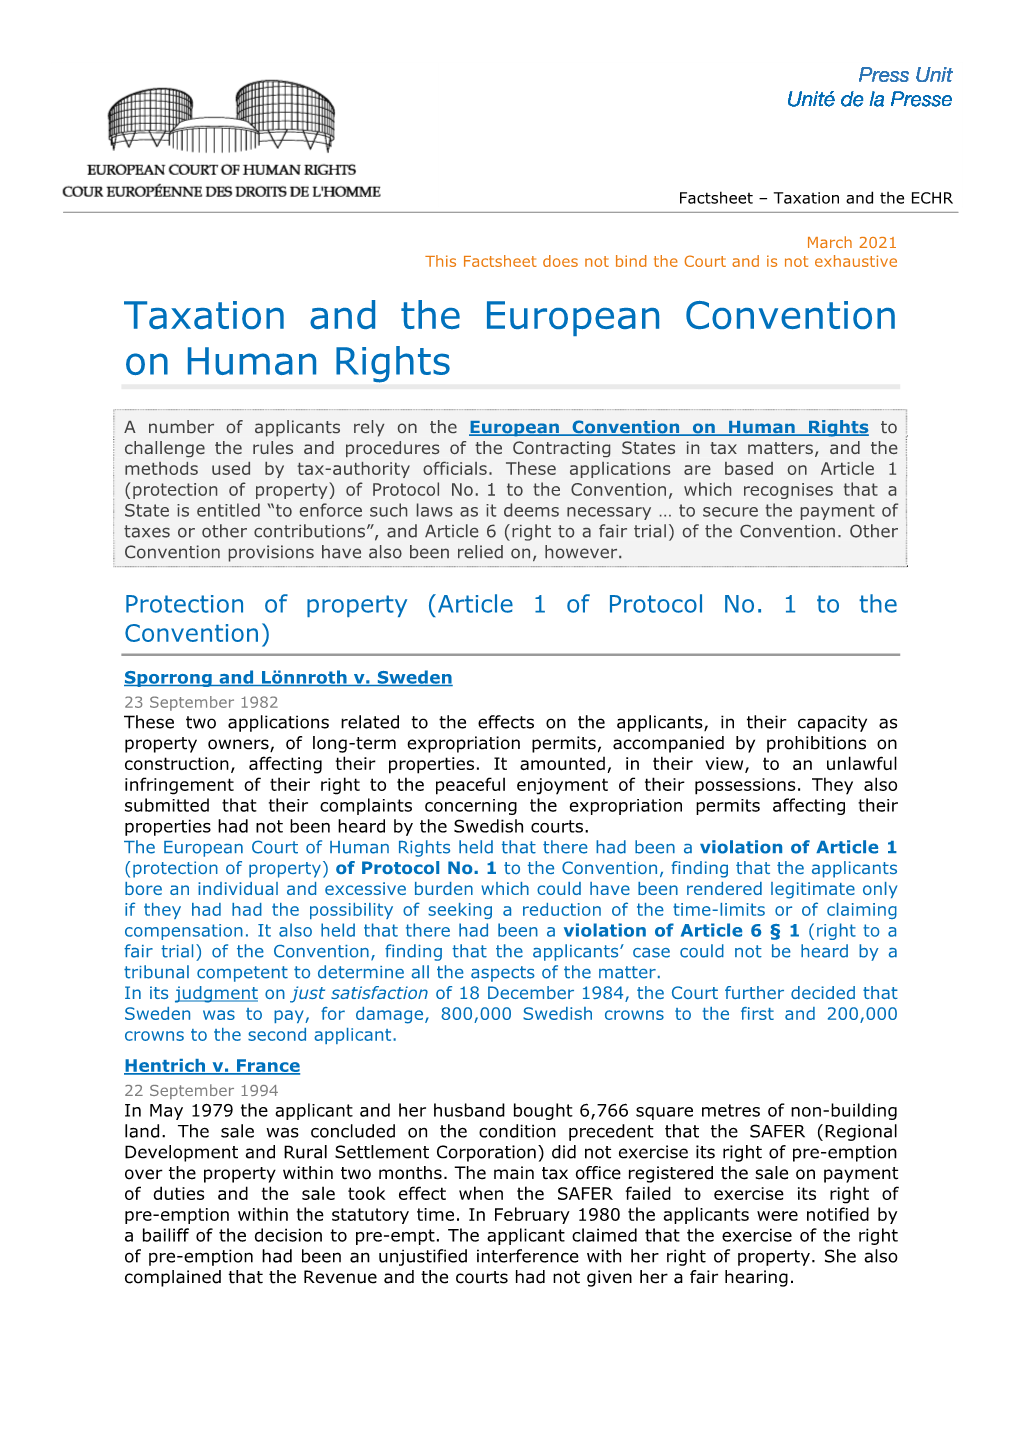 Taxation and the ECHR